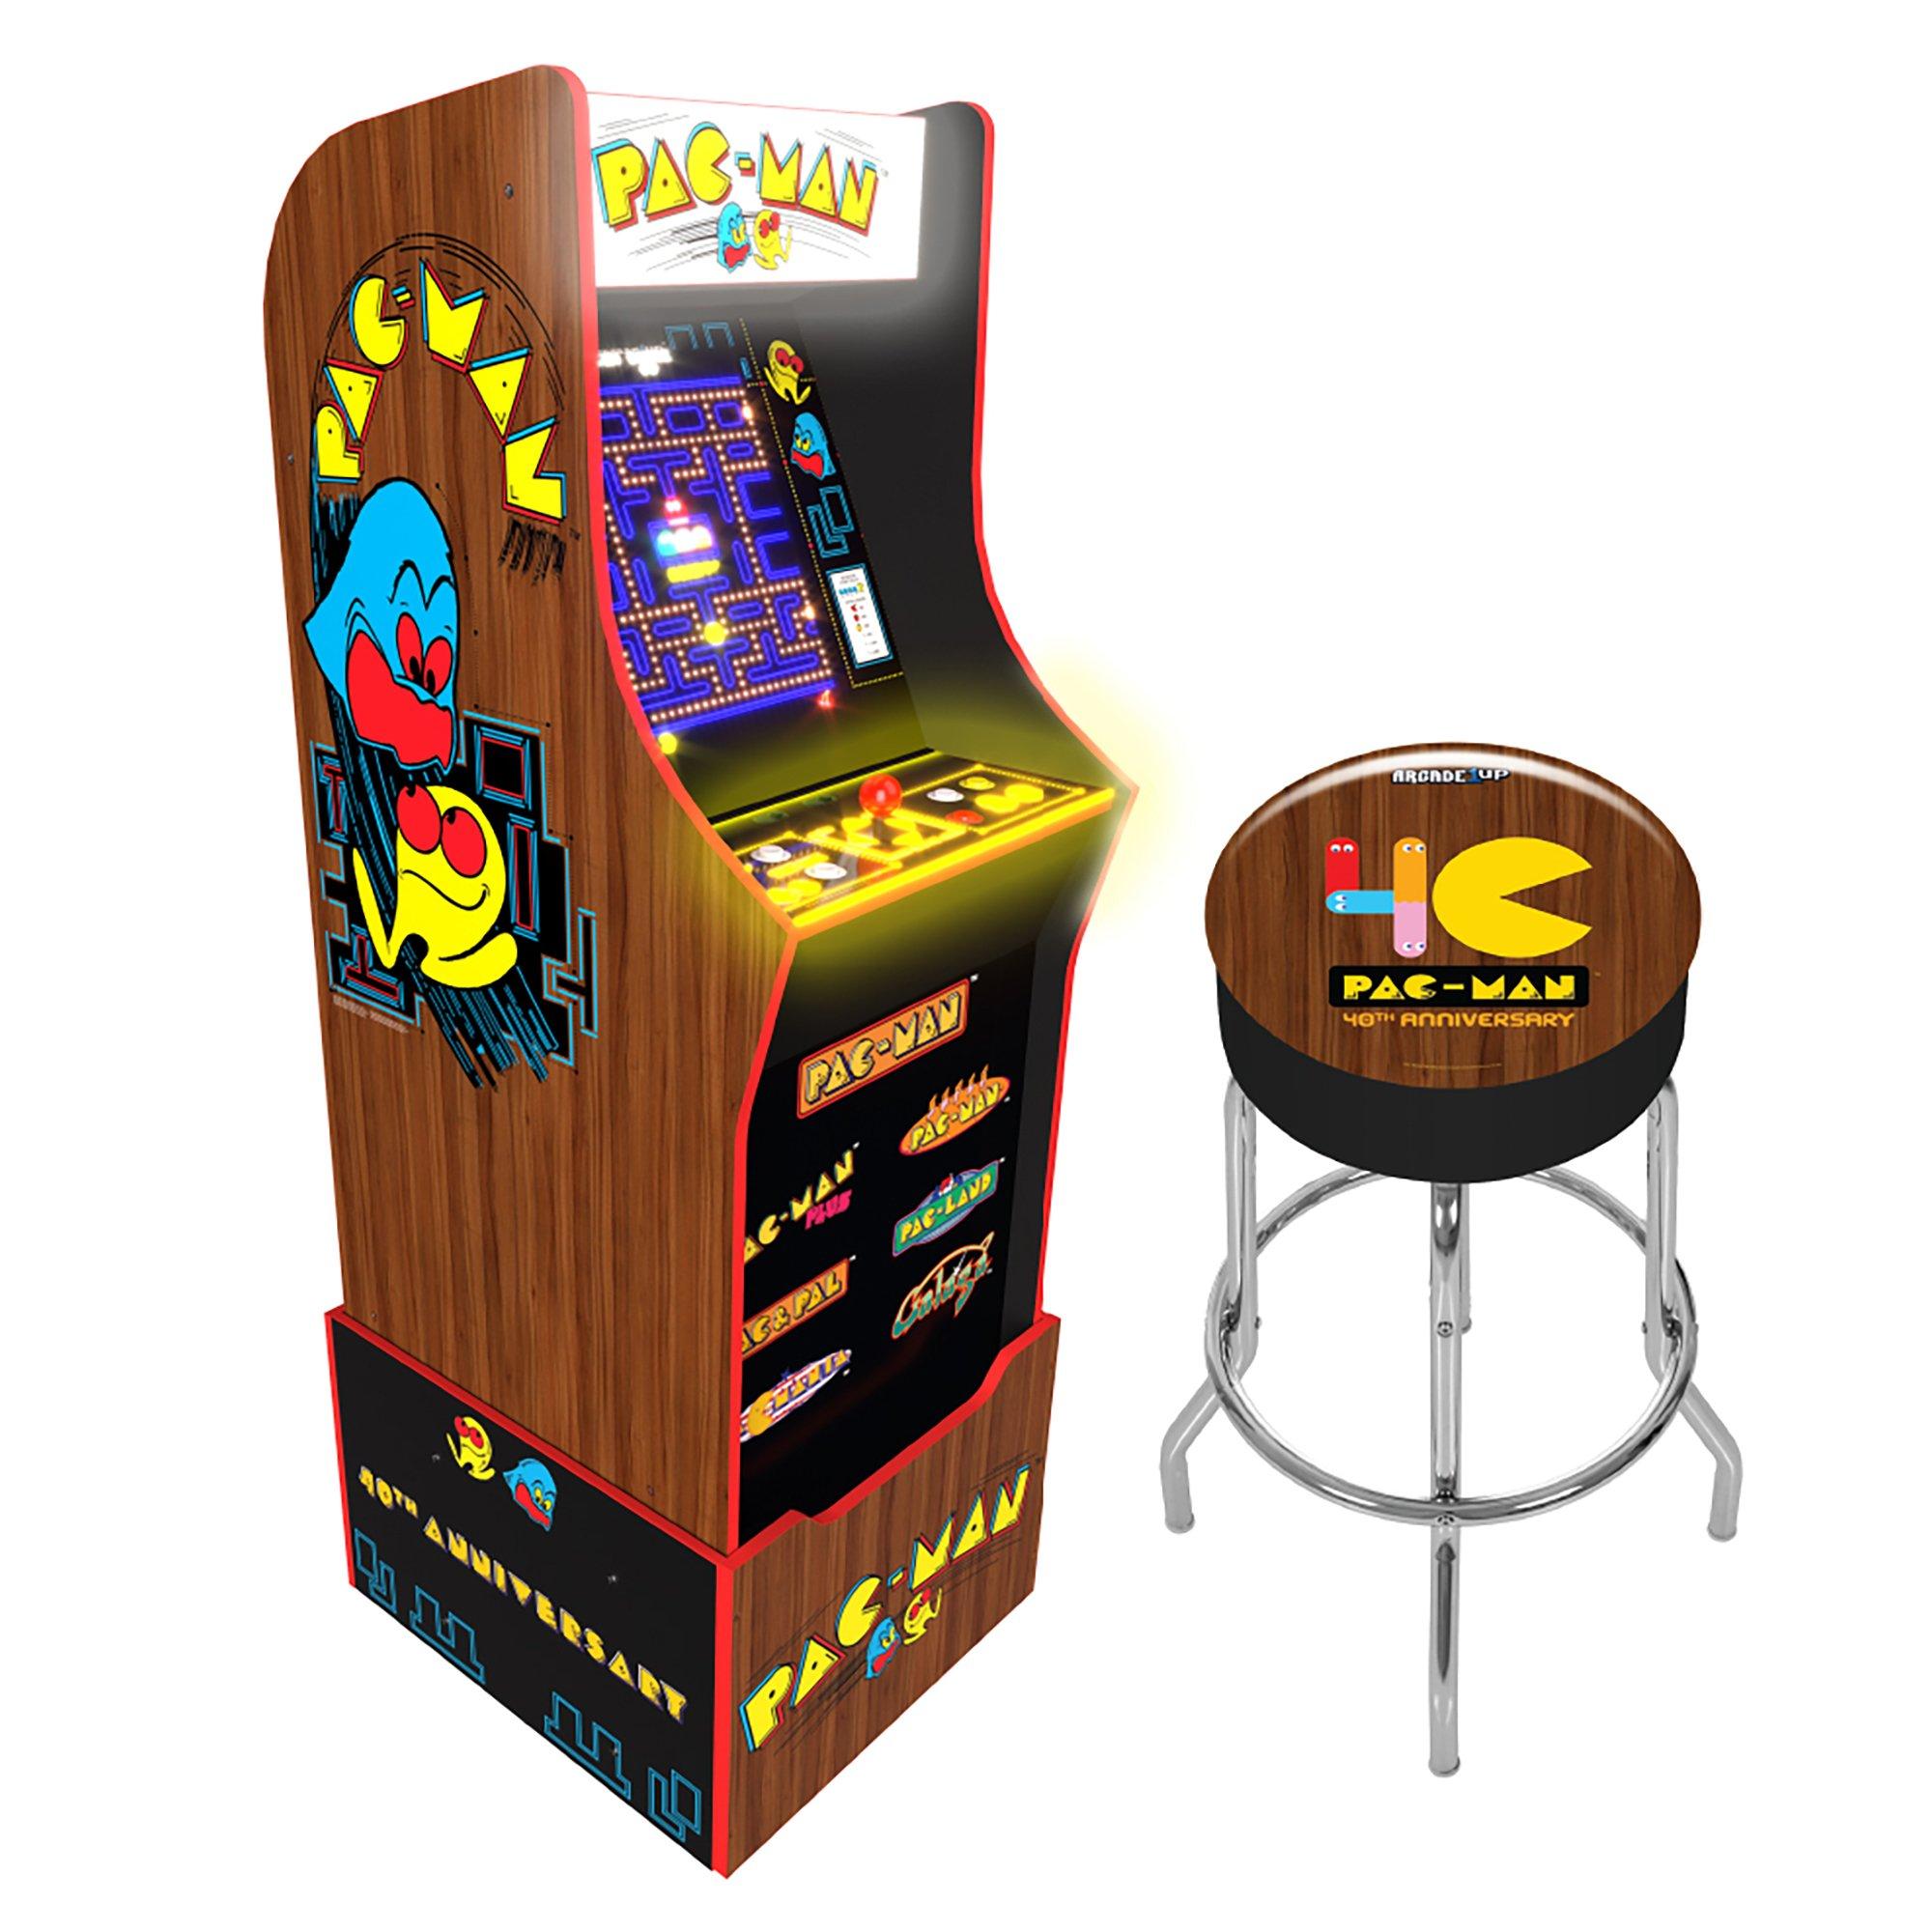 rent-to-own-arcade1up-pac-man-40th-anniversary-arcade-game-with-stool-at-aaron-s-today